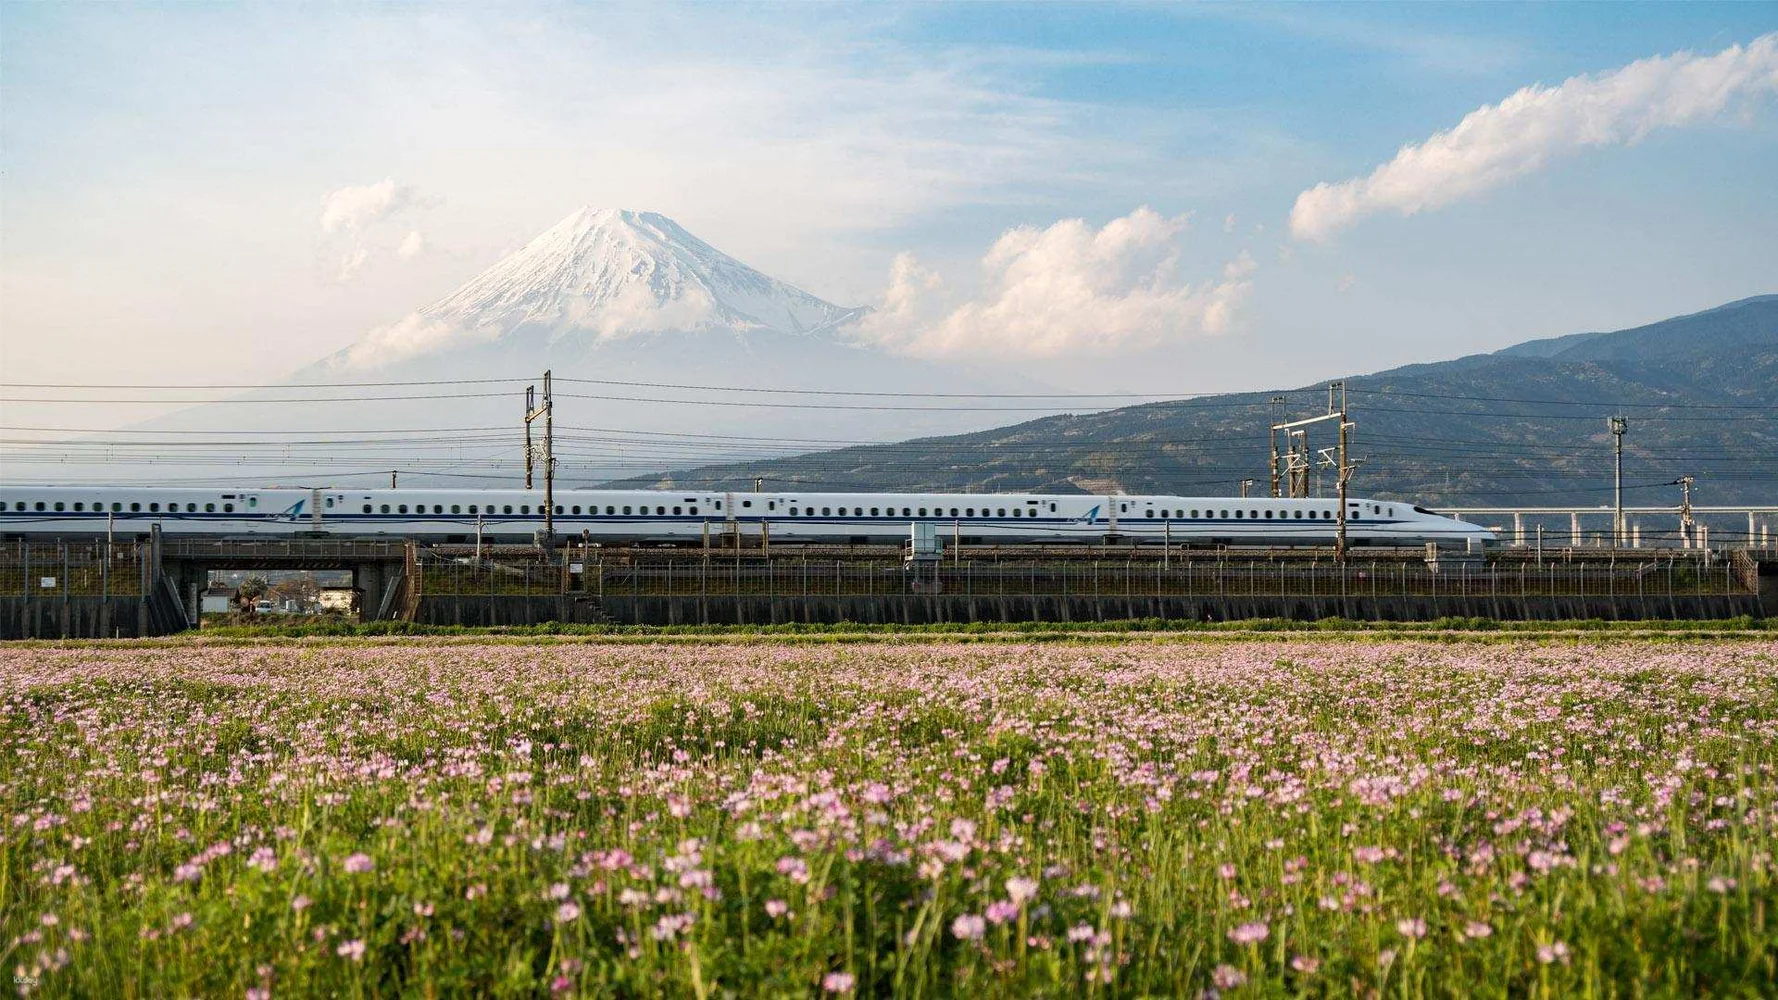 Japan Rail Pass (JR Pass) – 7, 14, or 21 Days Unlimited Rail Travel in Japan